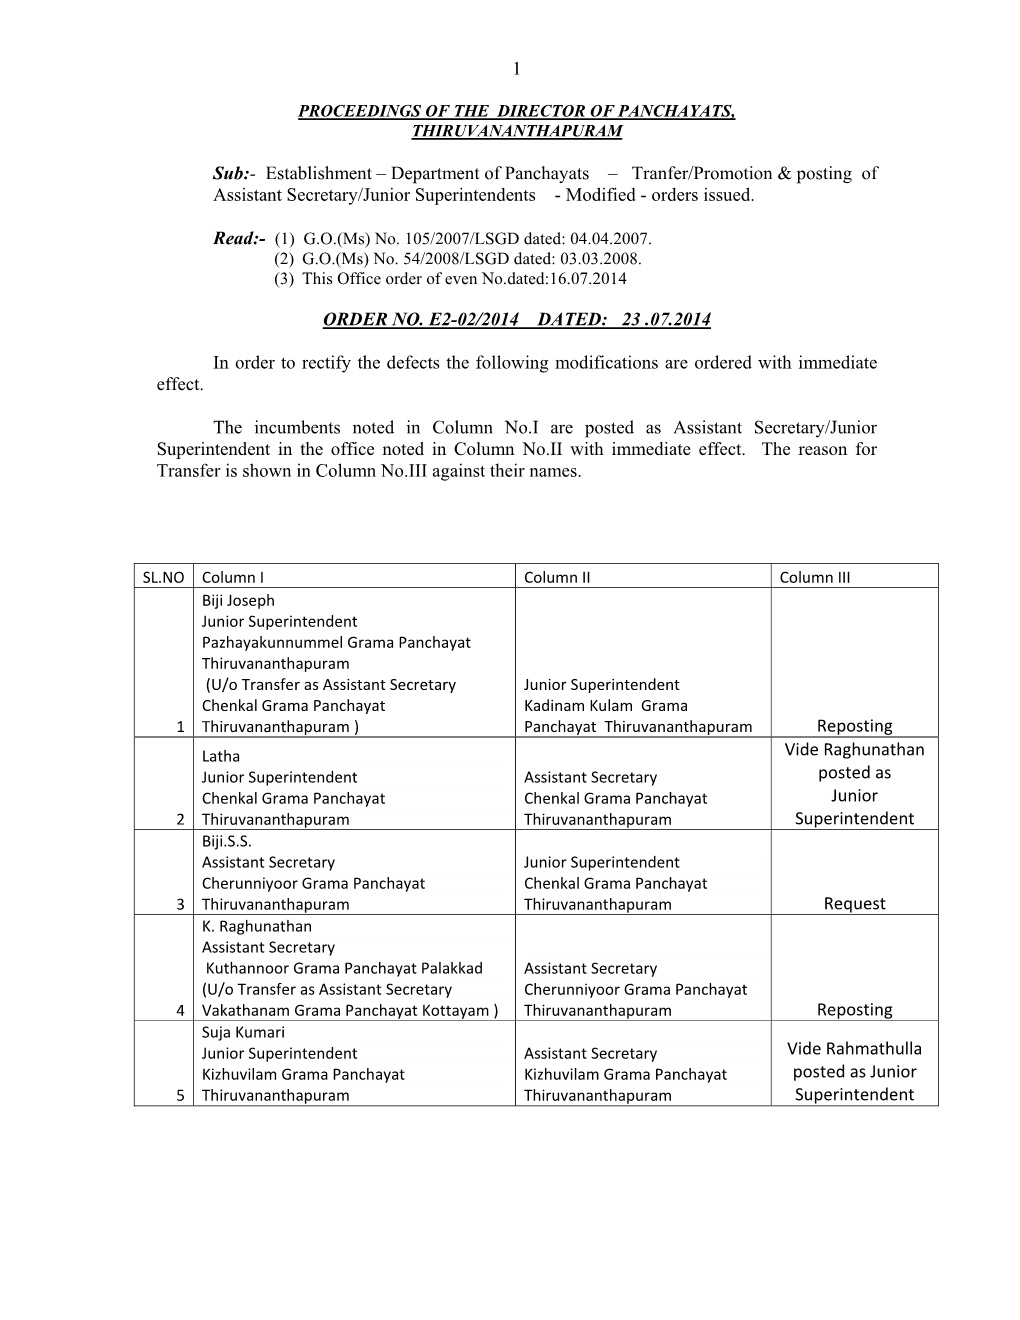 Department of Panchayats – Tranfer/Promotion & Posting of Assistant Secretary/Junior Supe